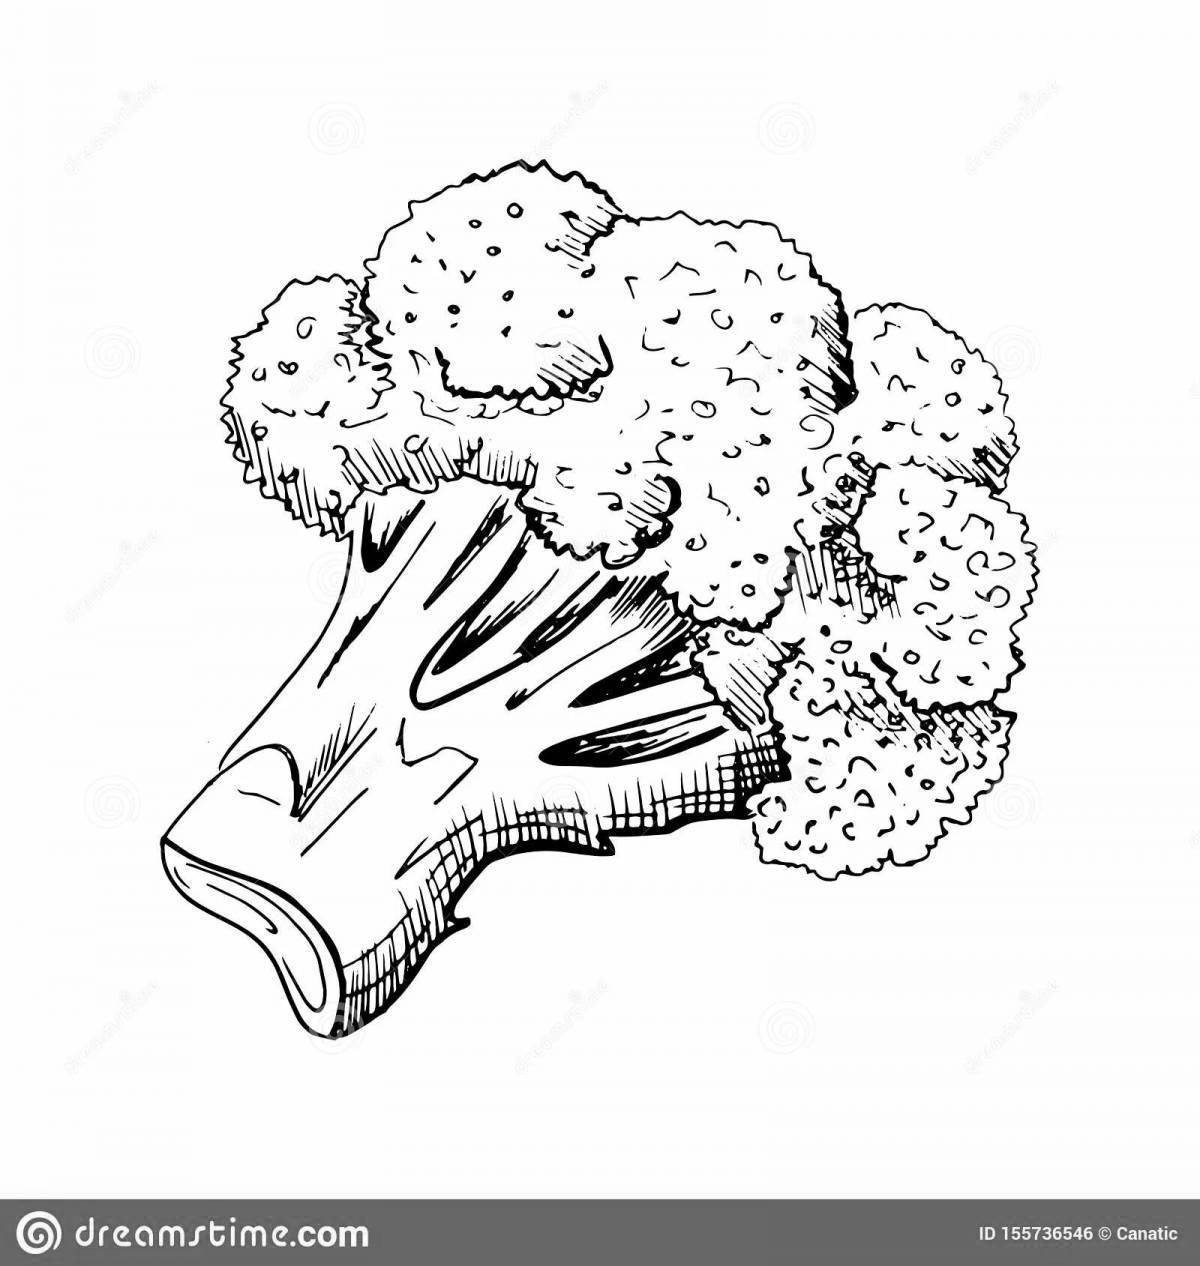 Fabulous broccoli coloring book for kids